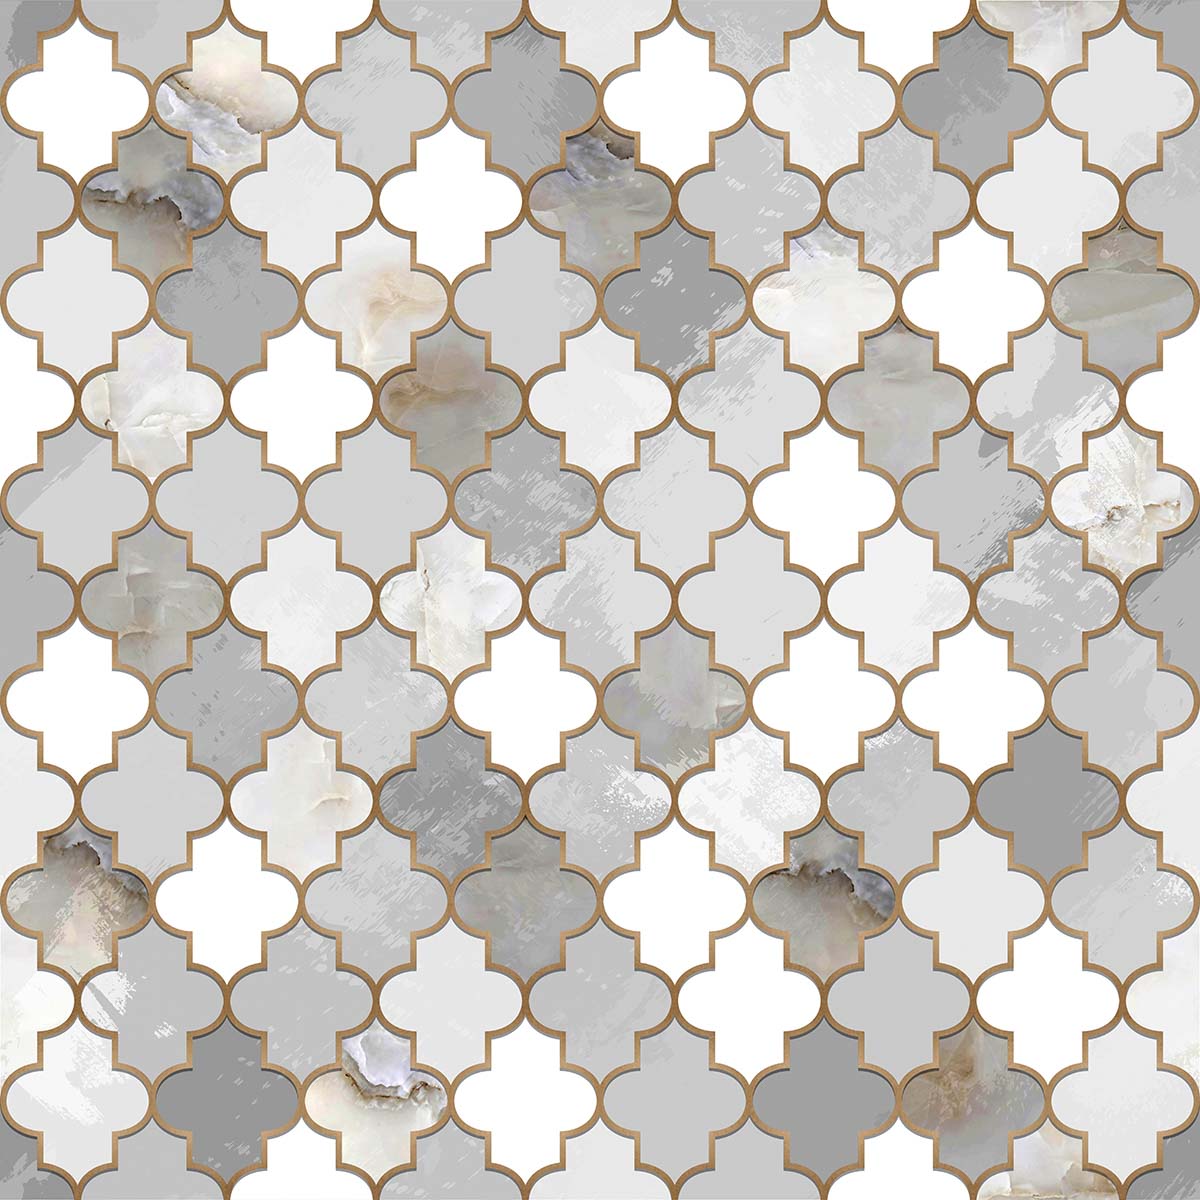 A grey and white tile with gold trim